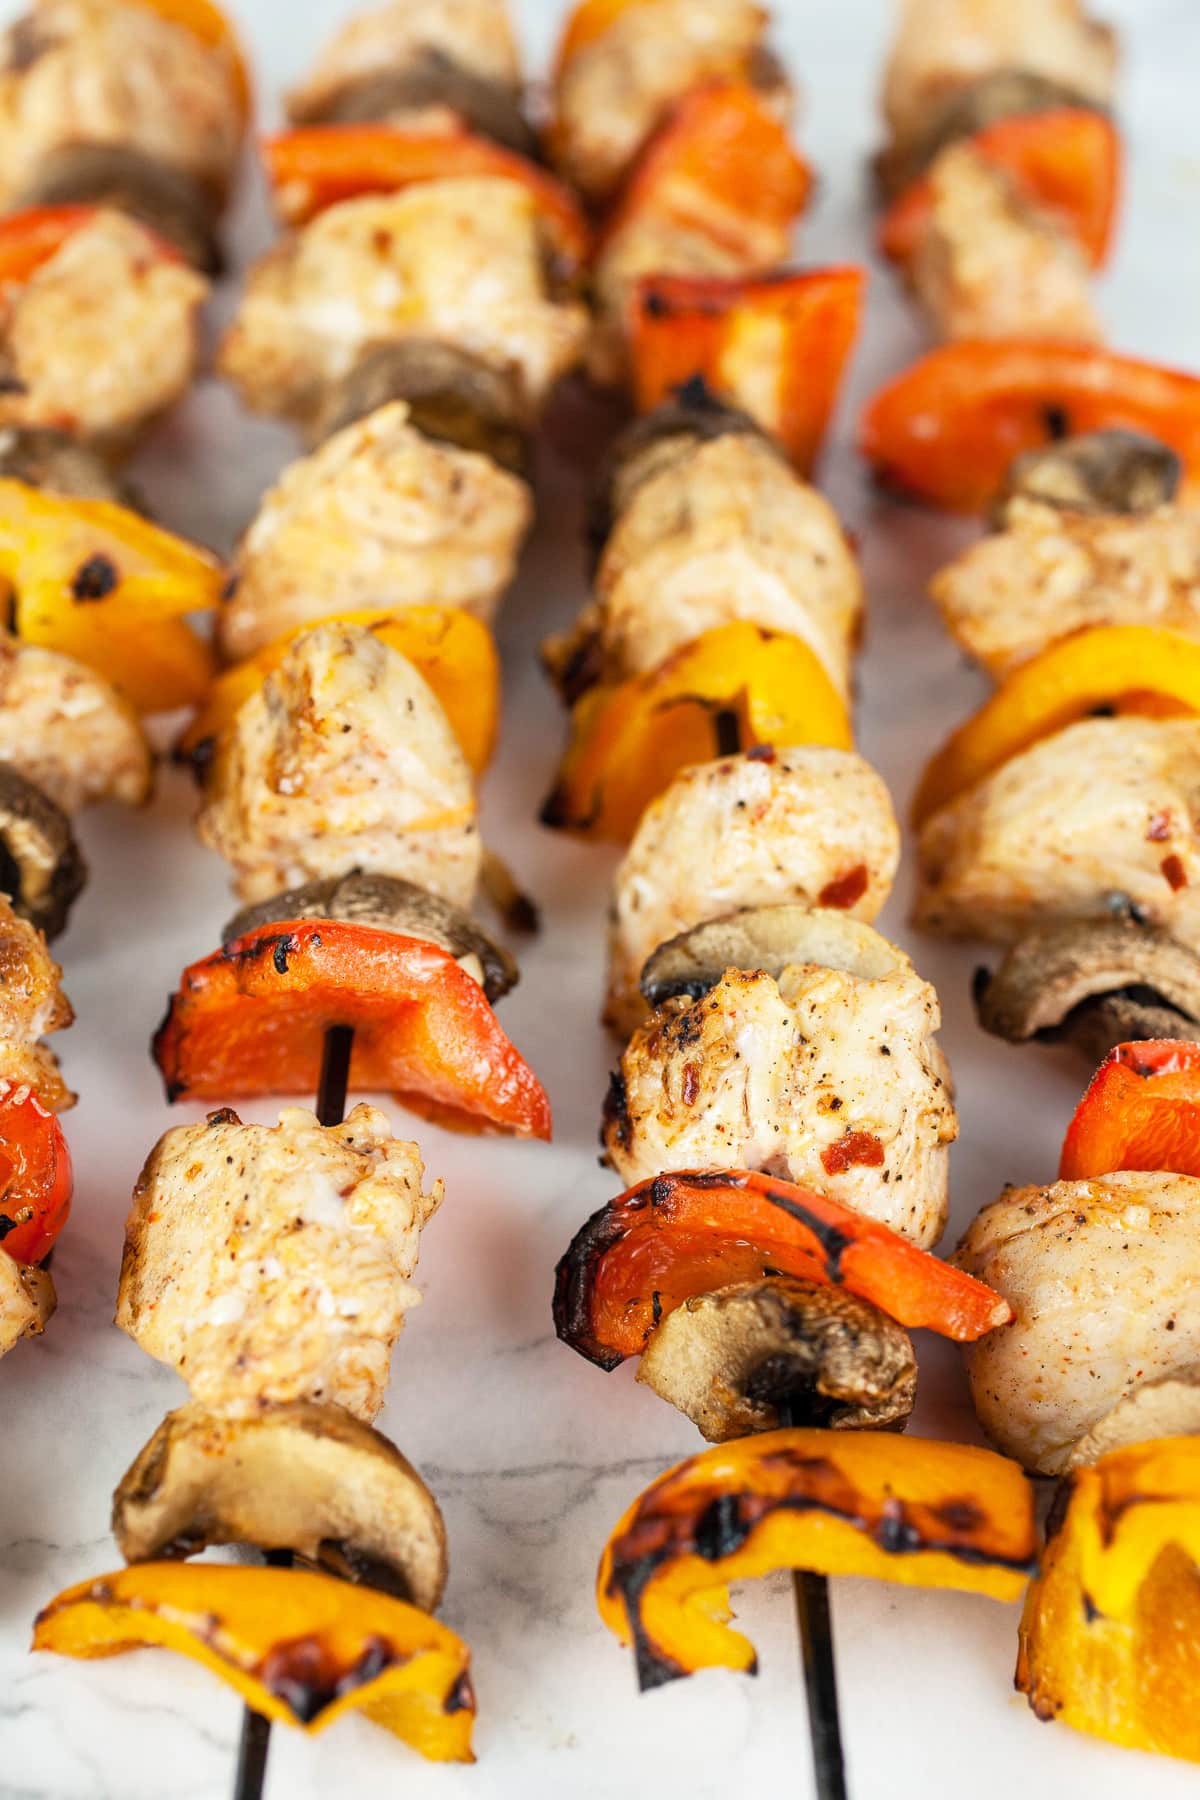 Grilled chicken and vegetable skewers.